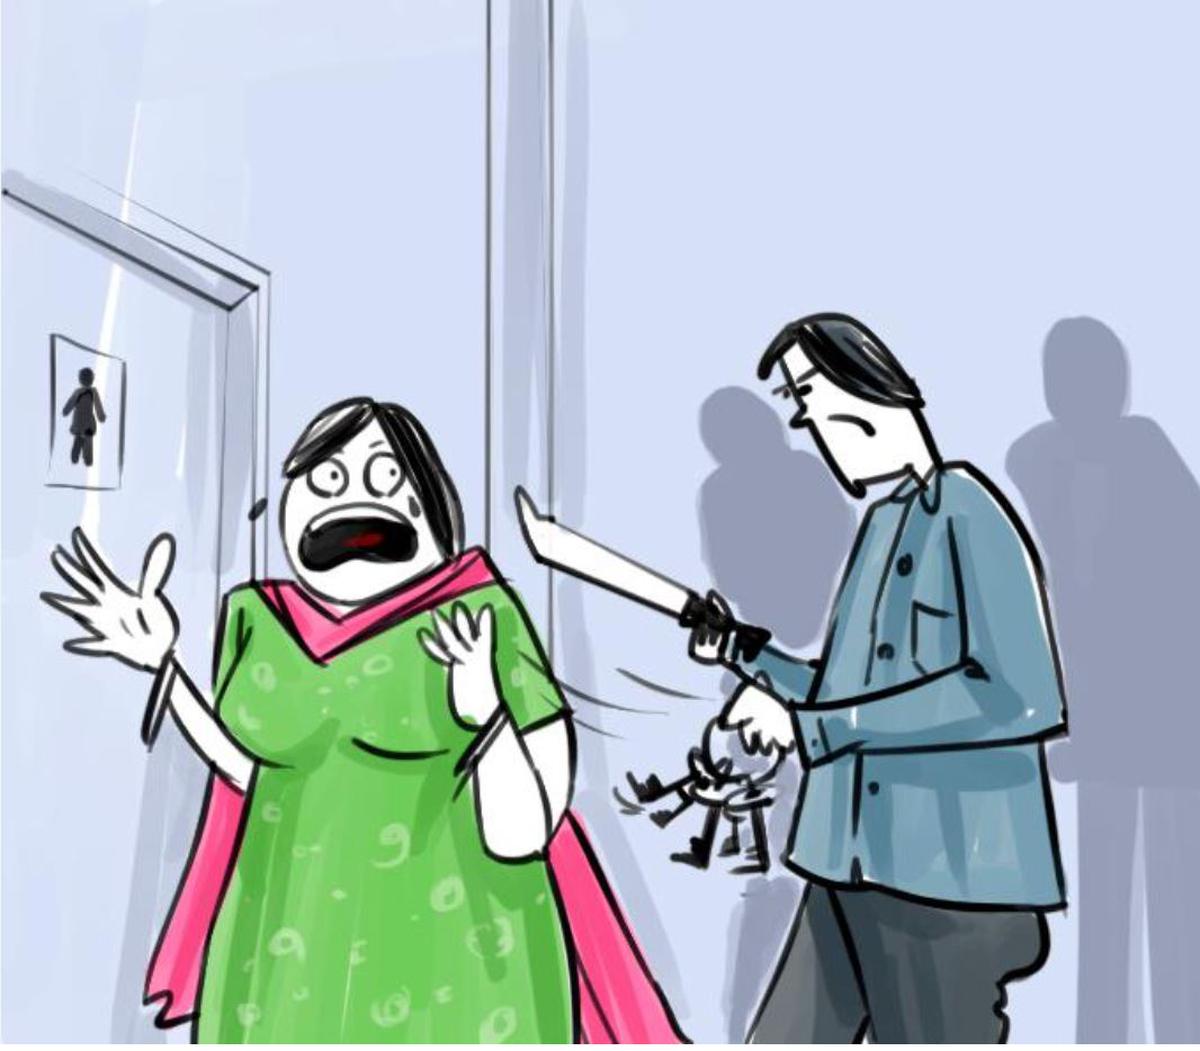 2.10 p.m.: Murugan and two associates barge in. They brandish a knife at Vijayalakshmi ; push her into bathroom after snatching the keys of the vault. Illustration: Sreejith R. Kumar